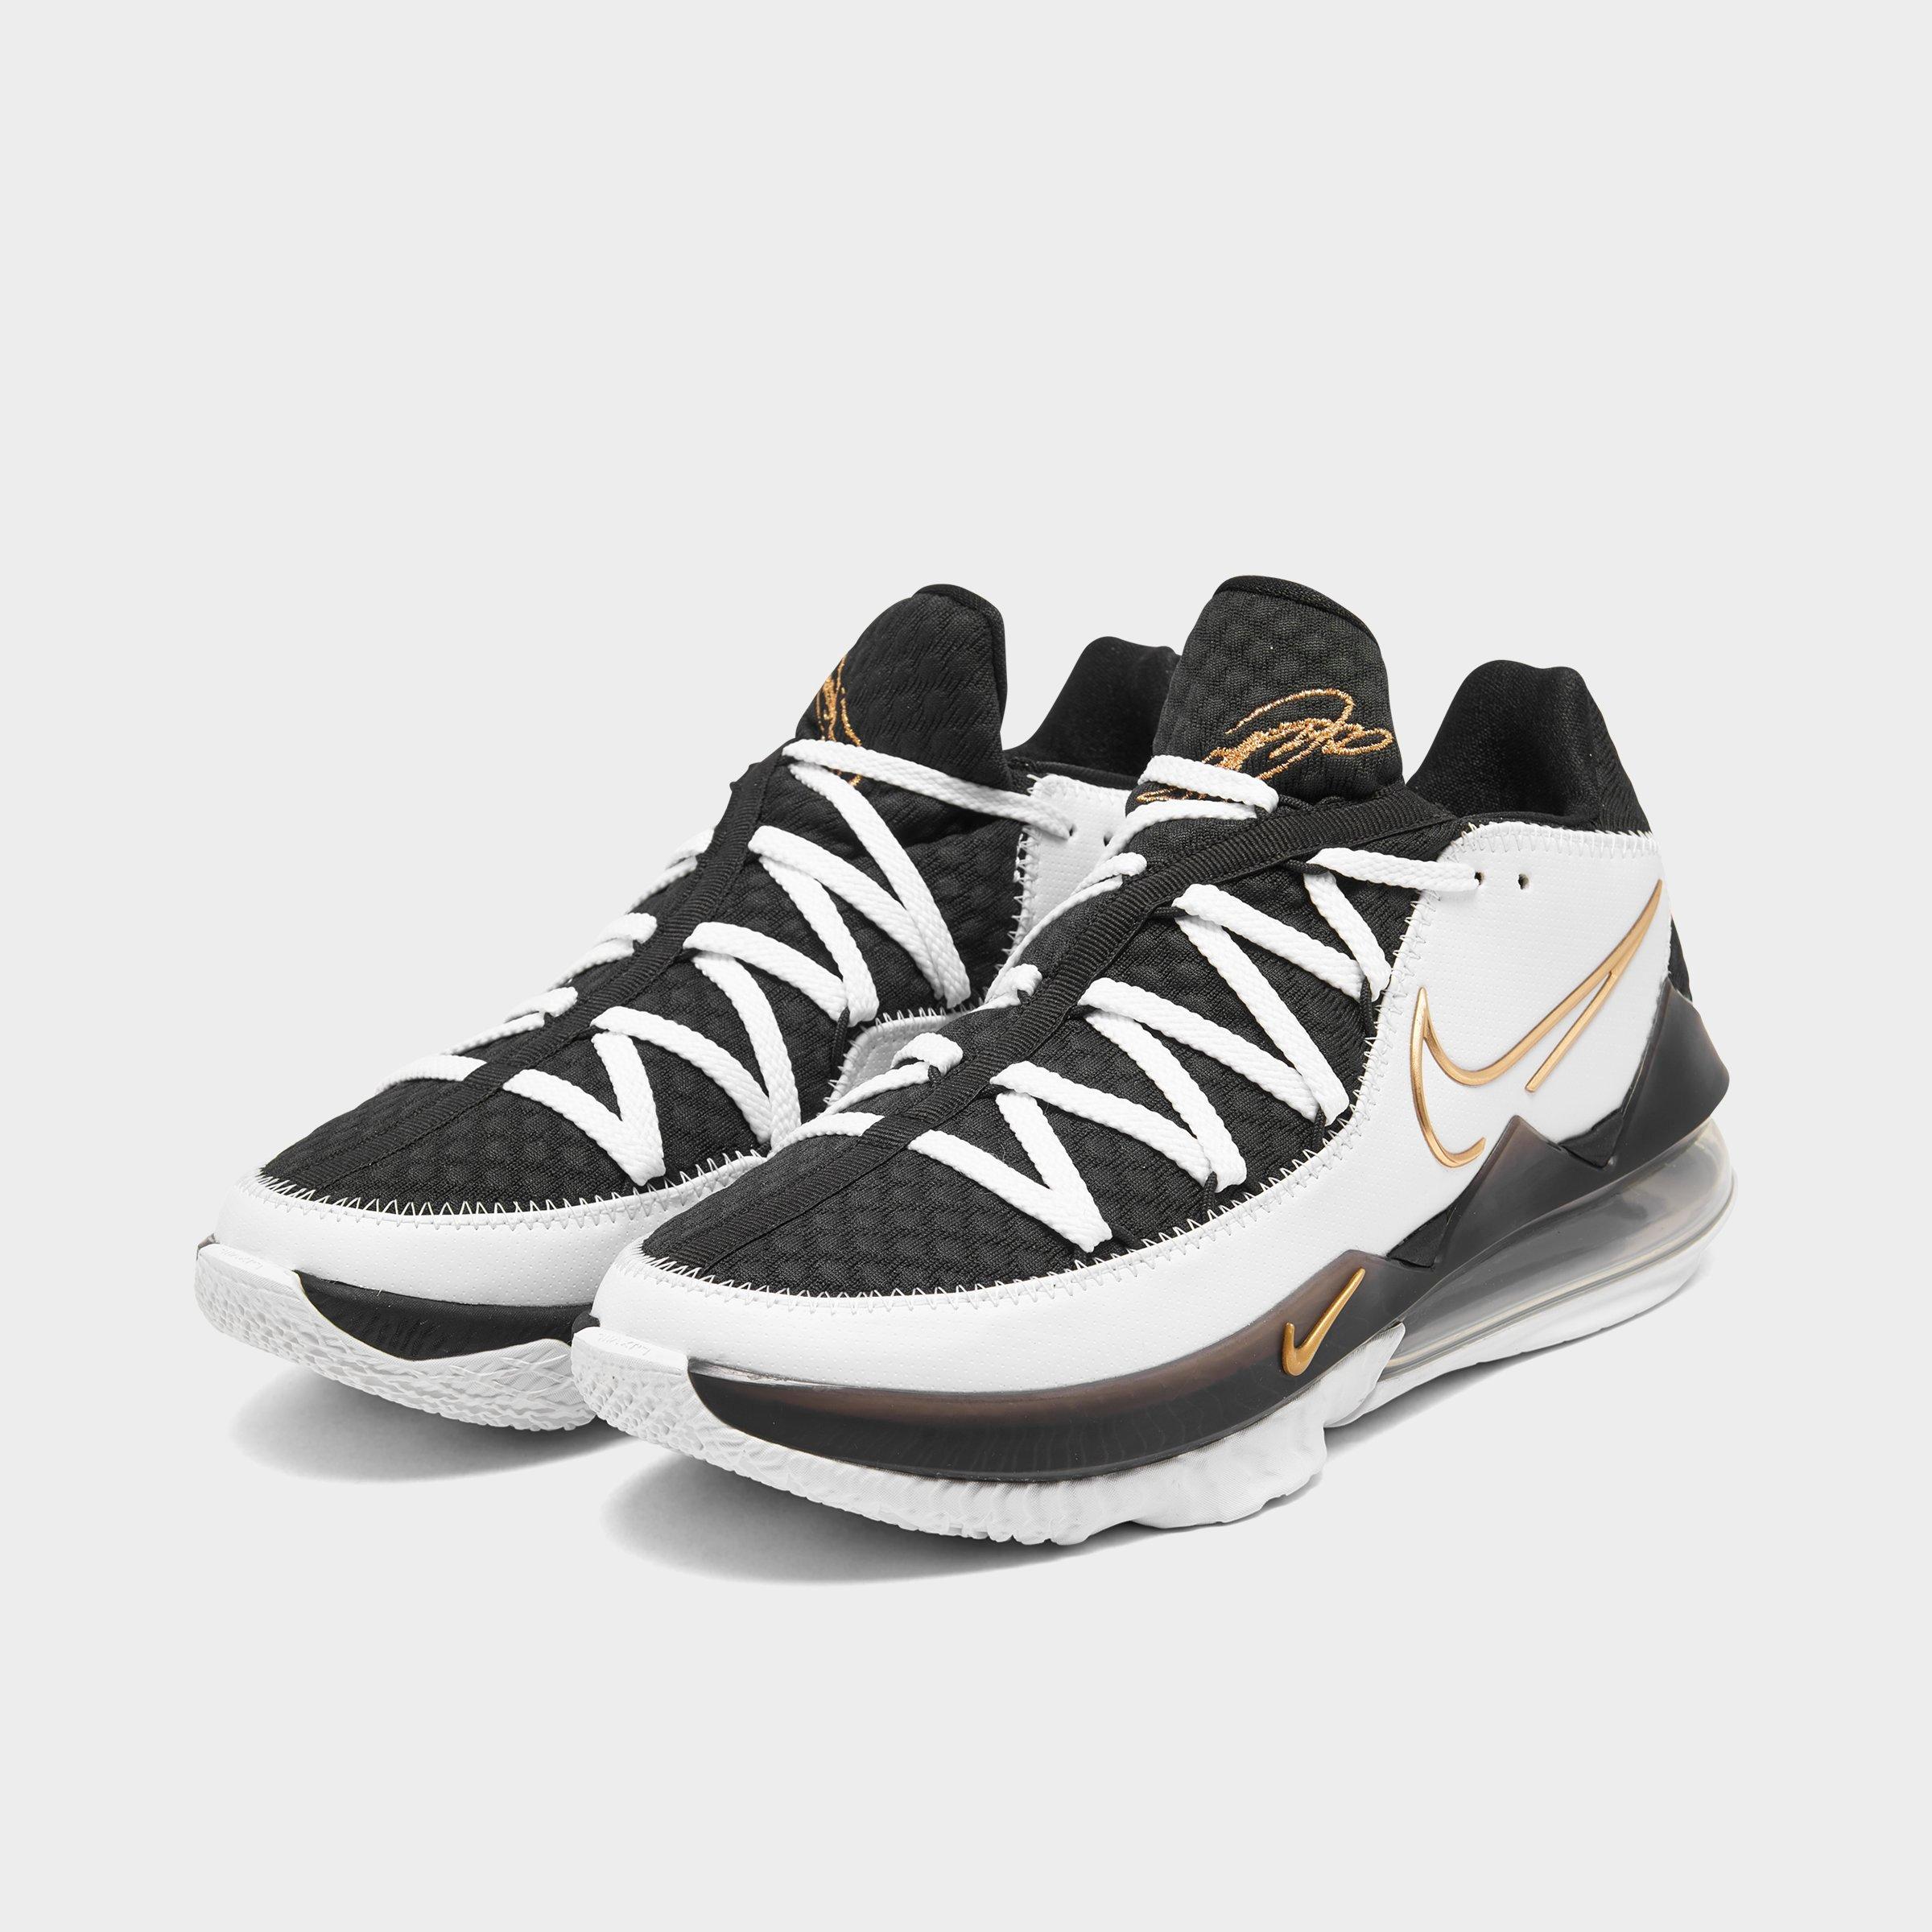 lebron 17 low basketball shoes